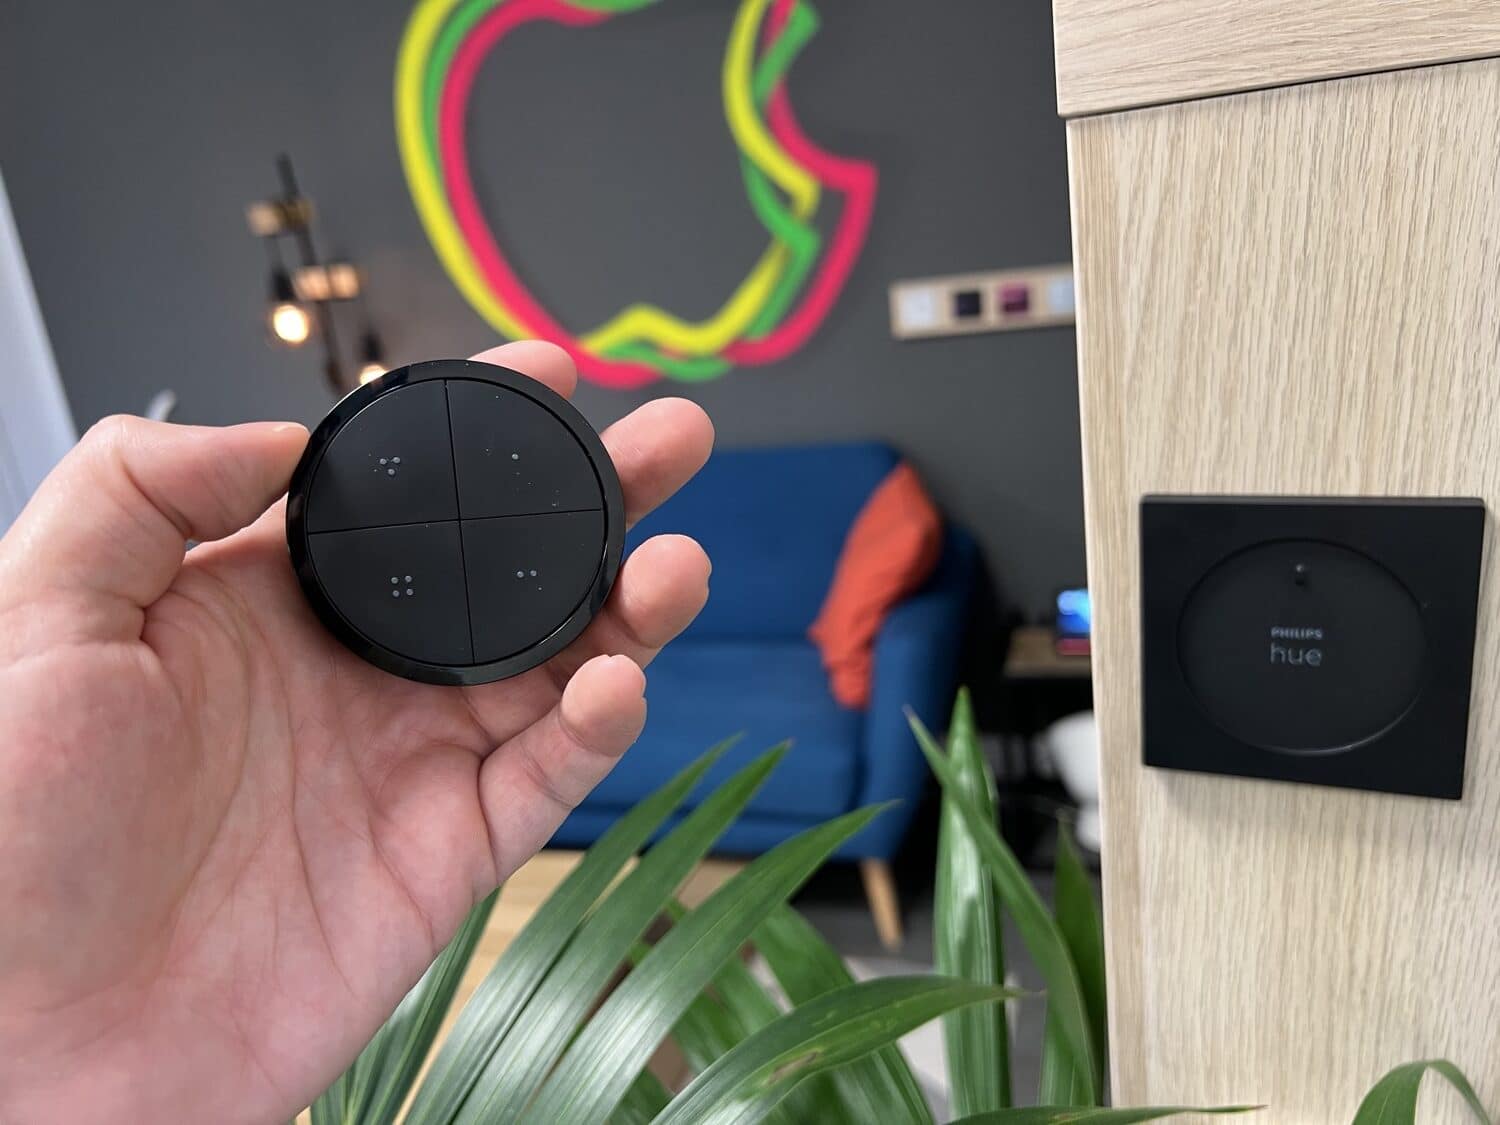 Hueblog: Hands-on with the new Philips Hue Tap Dial switch